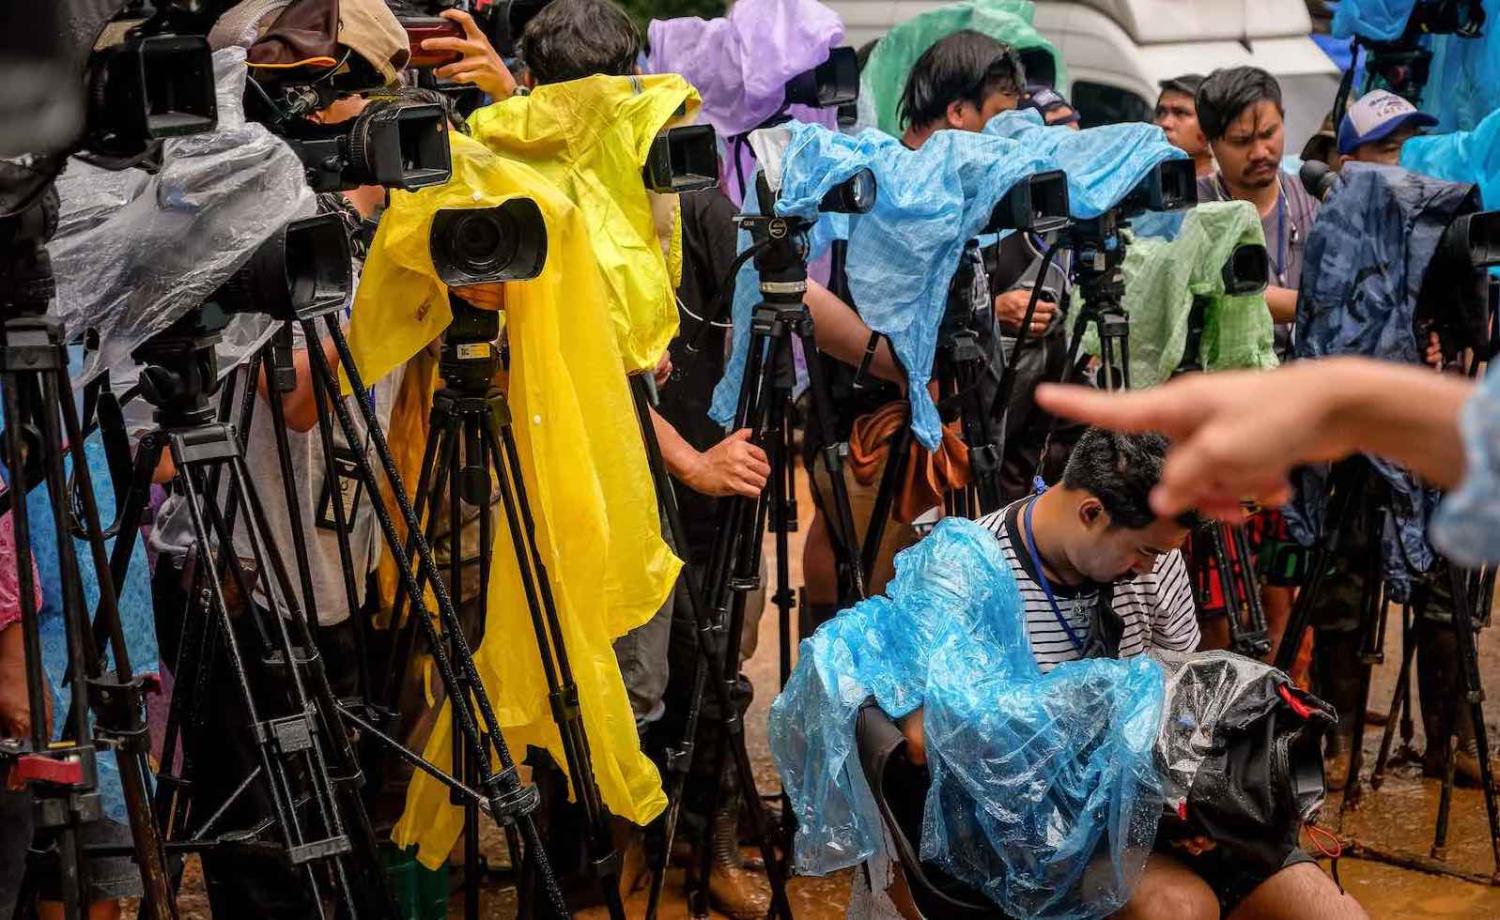 Waiting for news outside the cave at Tham Luang Nang Non, Thailand (Photo: Linh Pham/Getty)